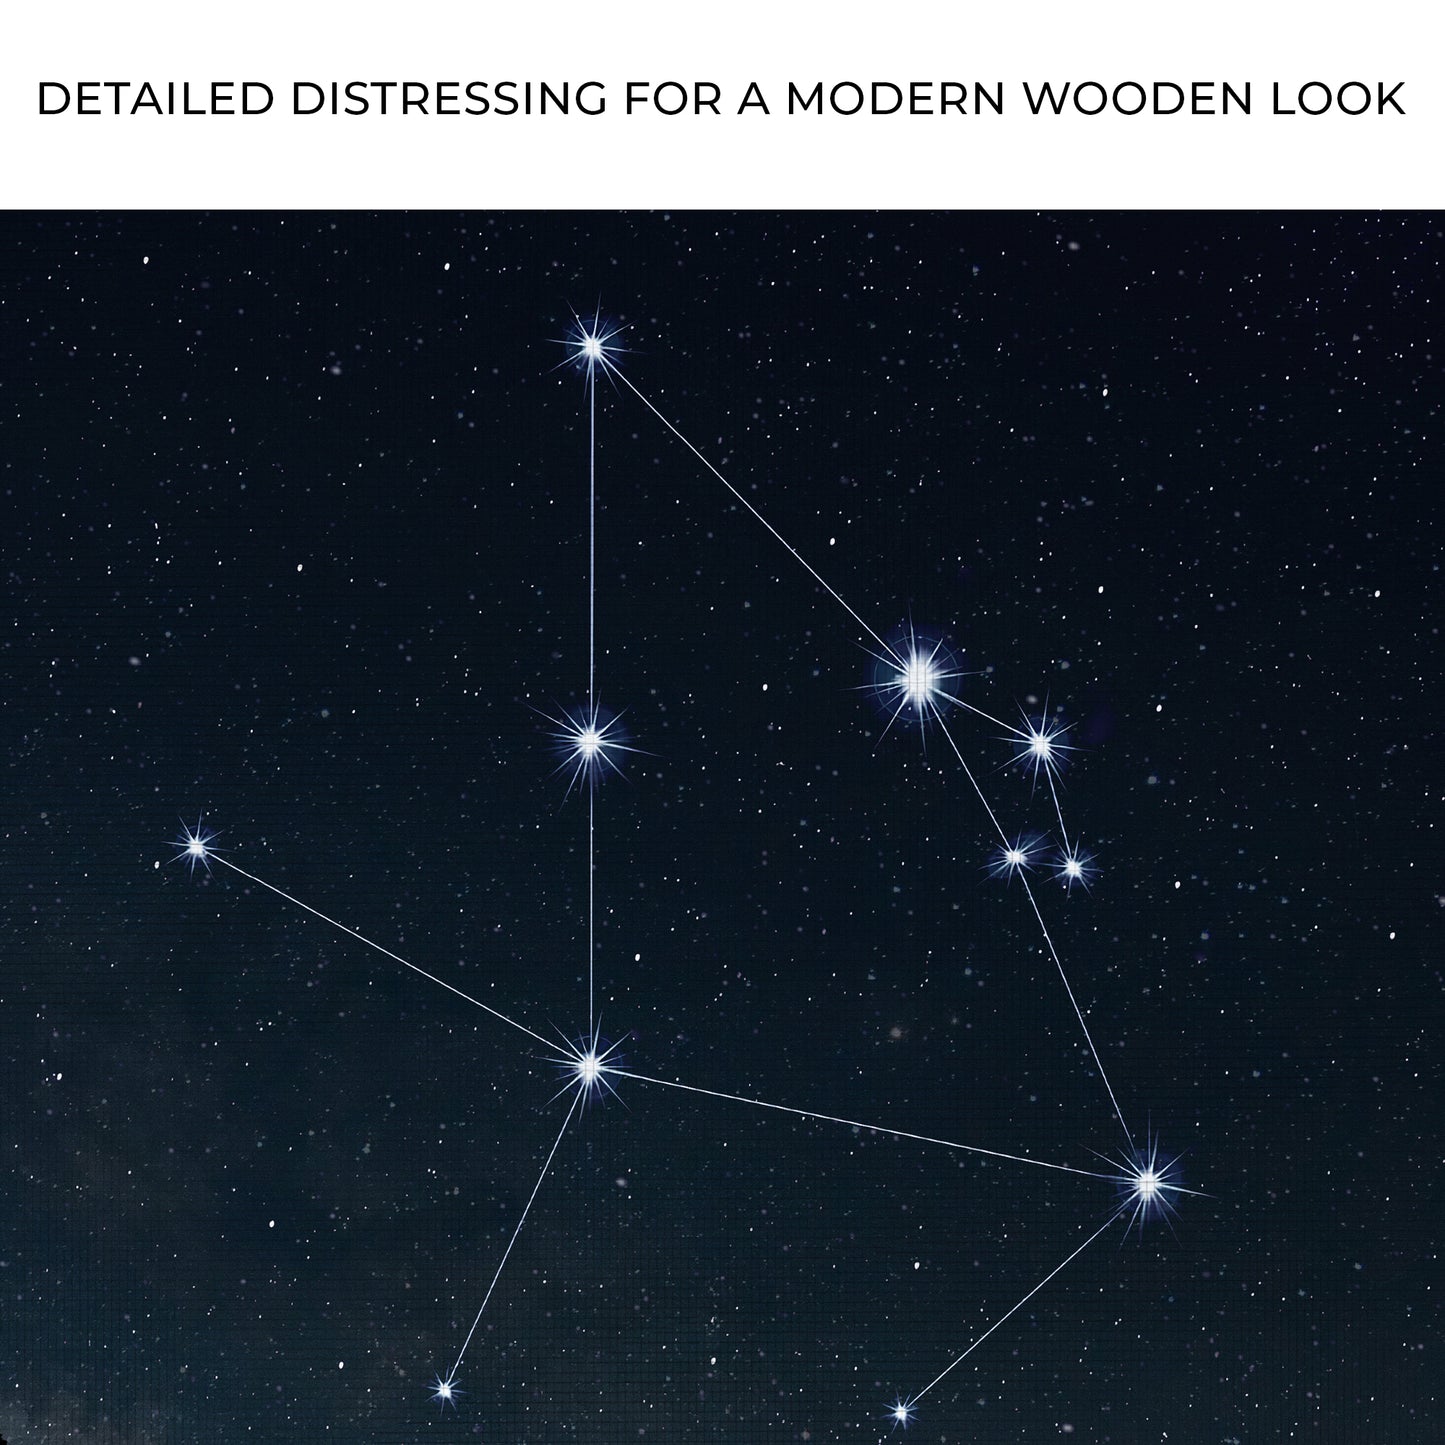 Auriga Constellation Canvas Wall Art Zoom - Image by Tailored Canvases